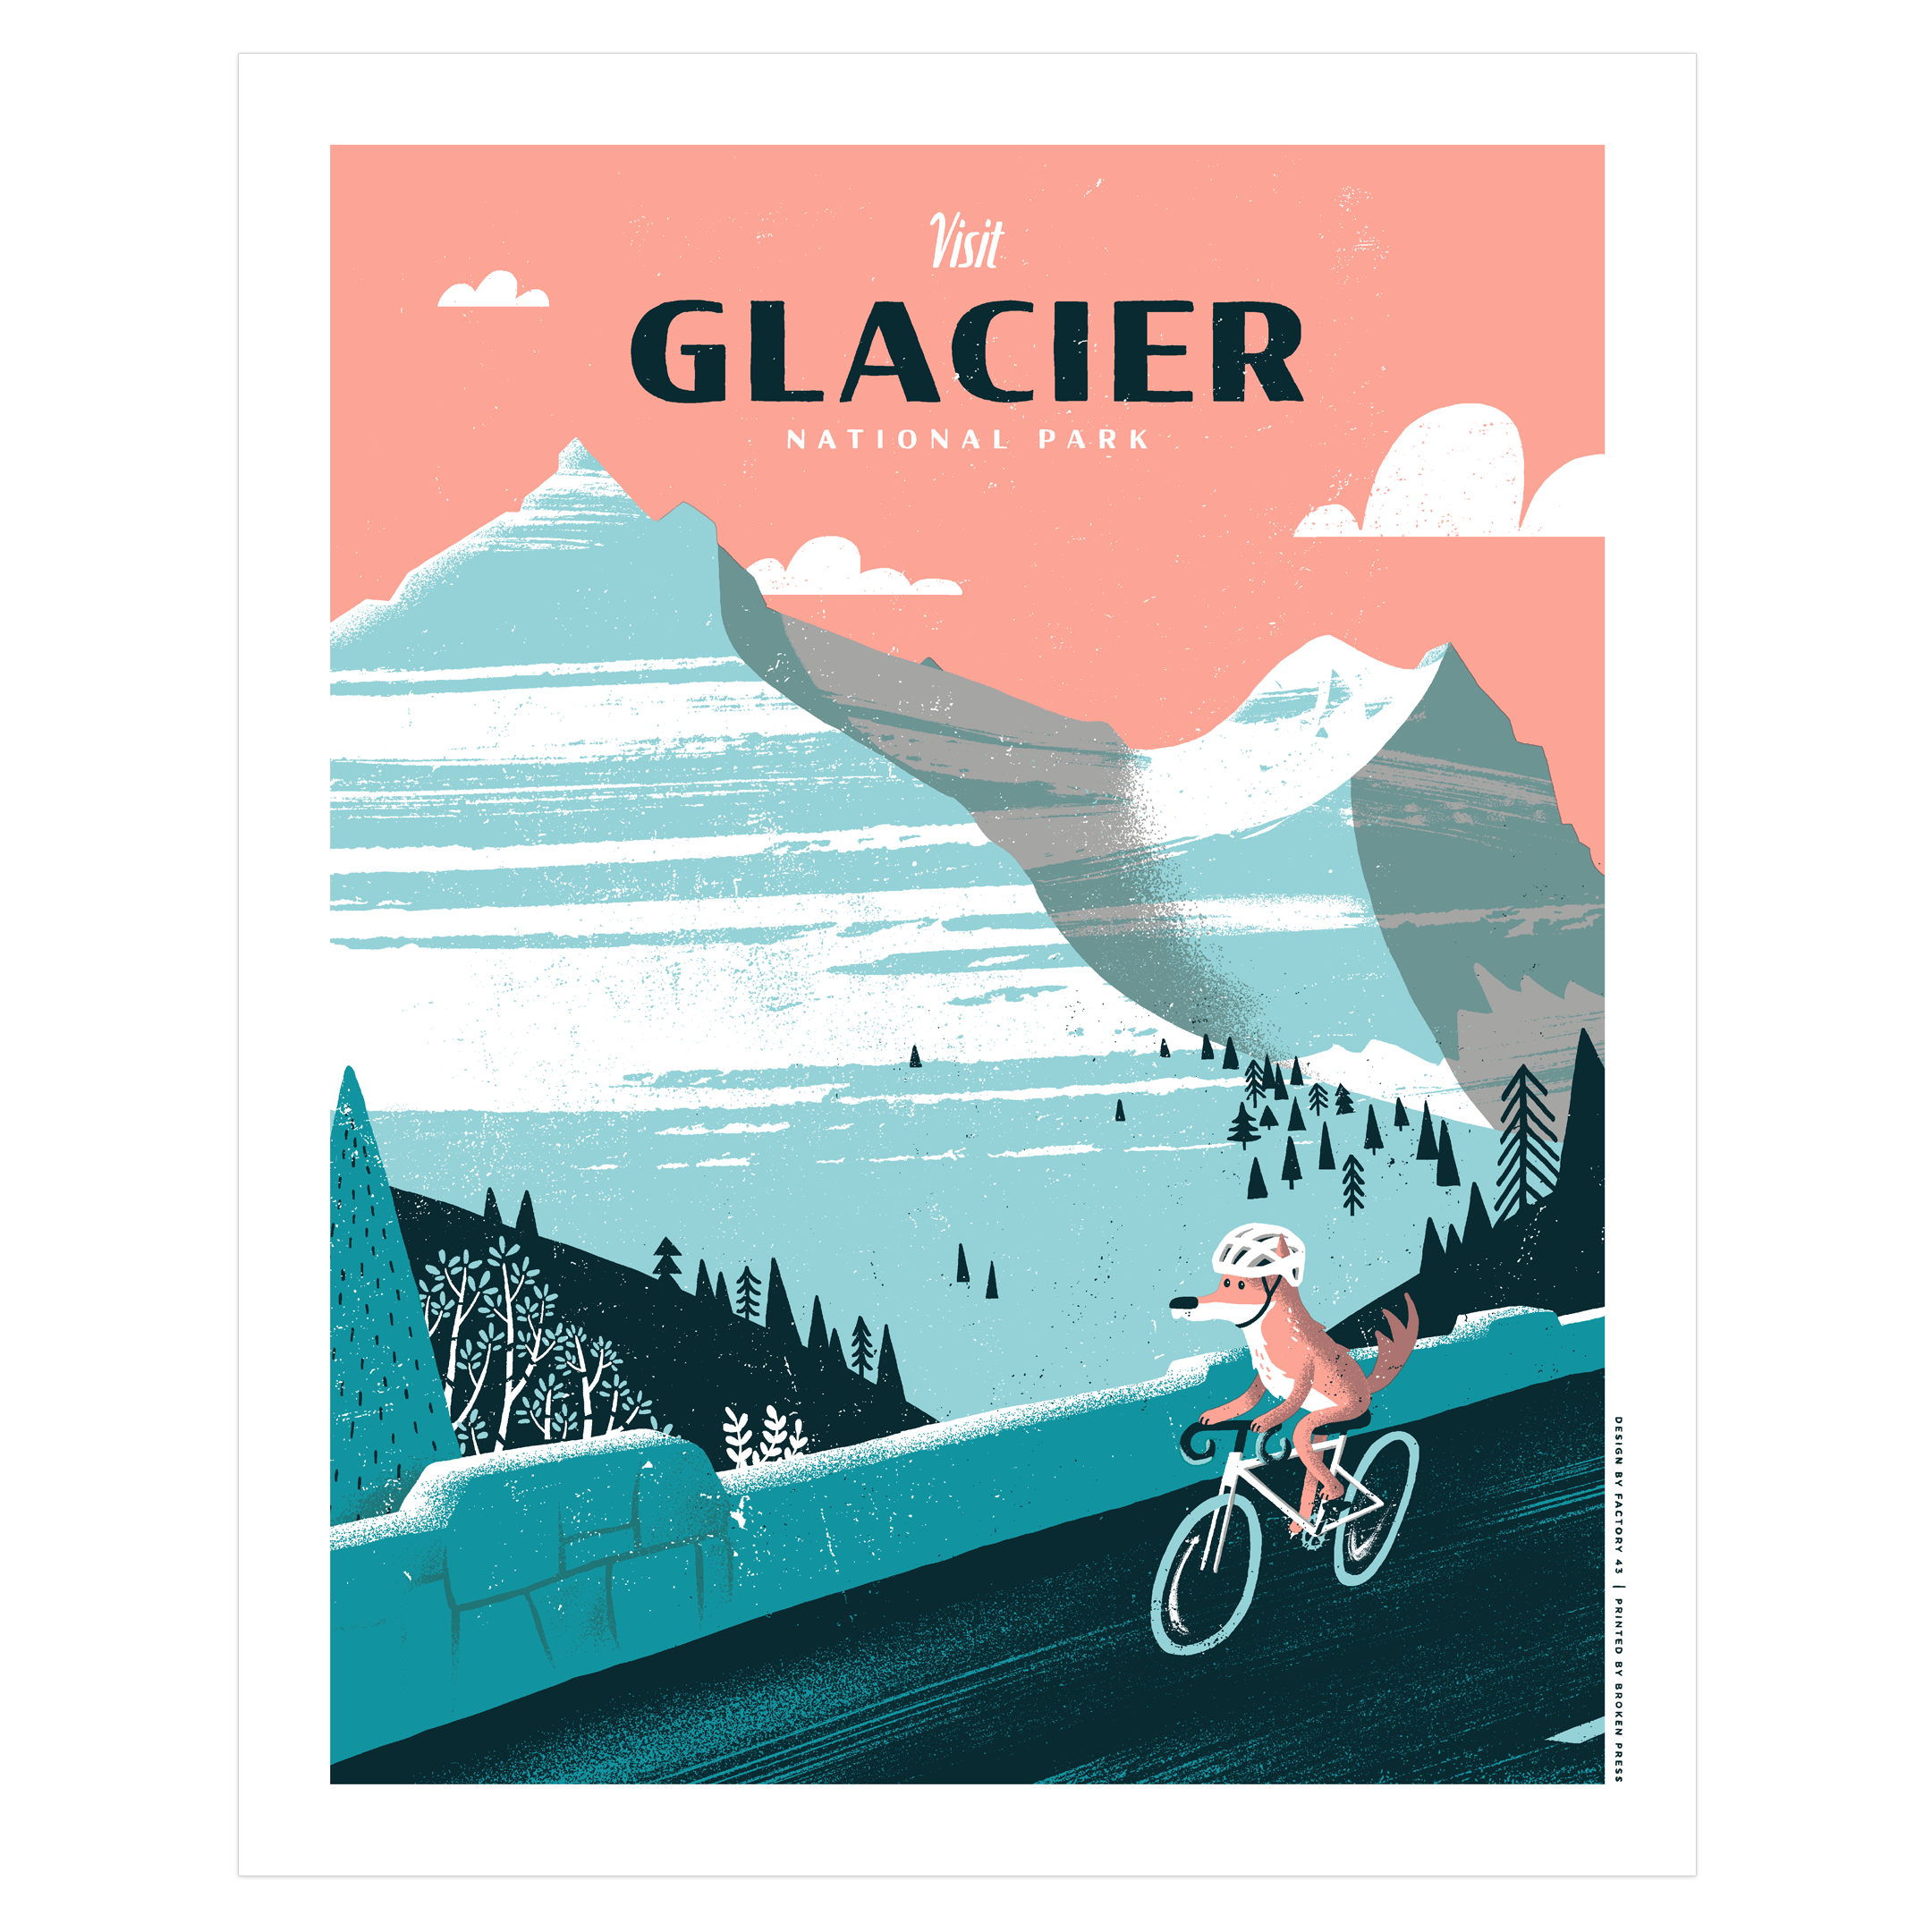 A wolverine takes a scenic bike ride in Glacier National Park in Montana.